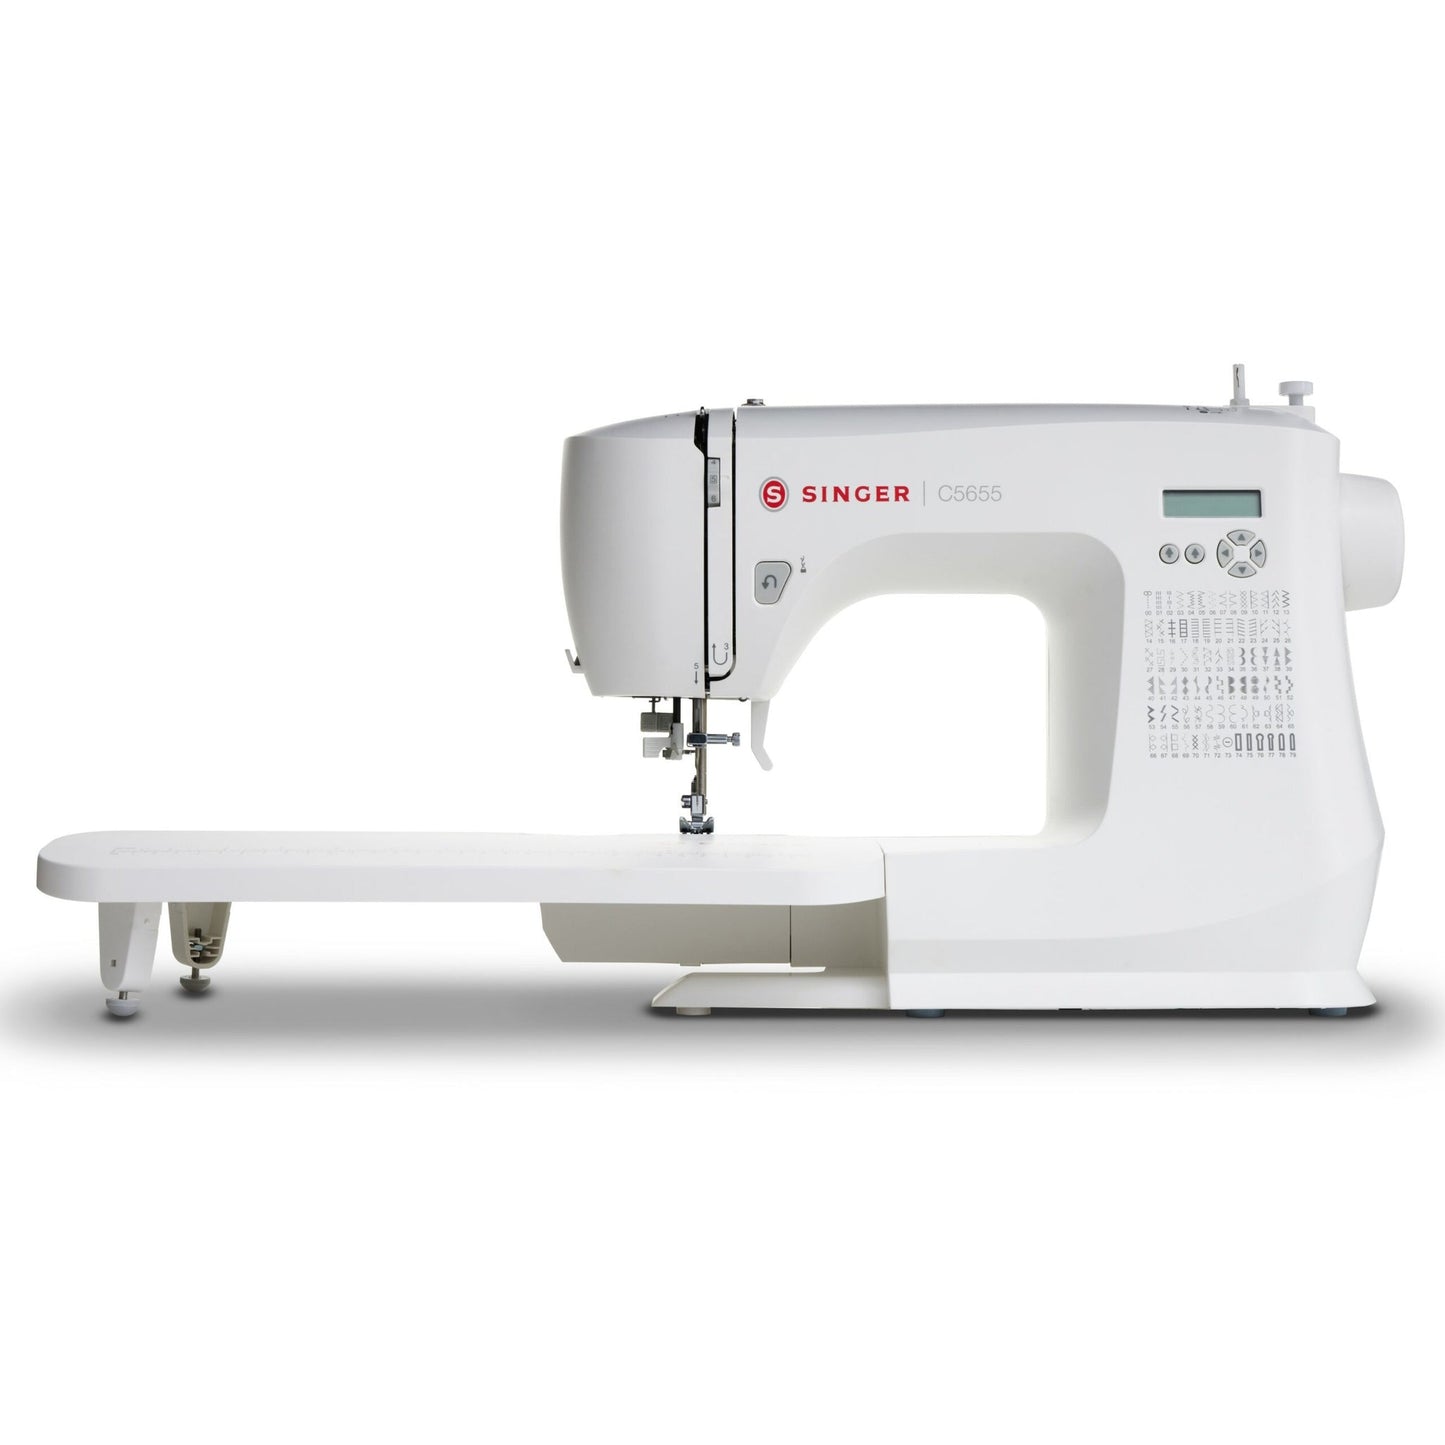 Singer Starlet 6680 Sewing Machine with large extension table * Get a FREE upgrade to new C5655 model at no extra cost on this offer